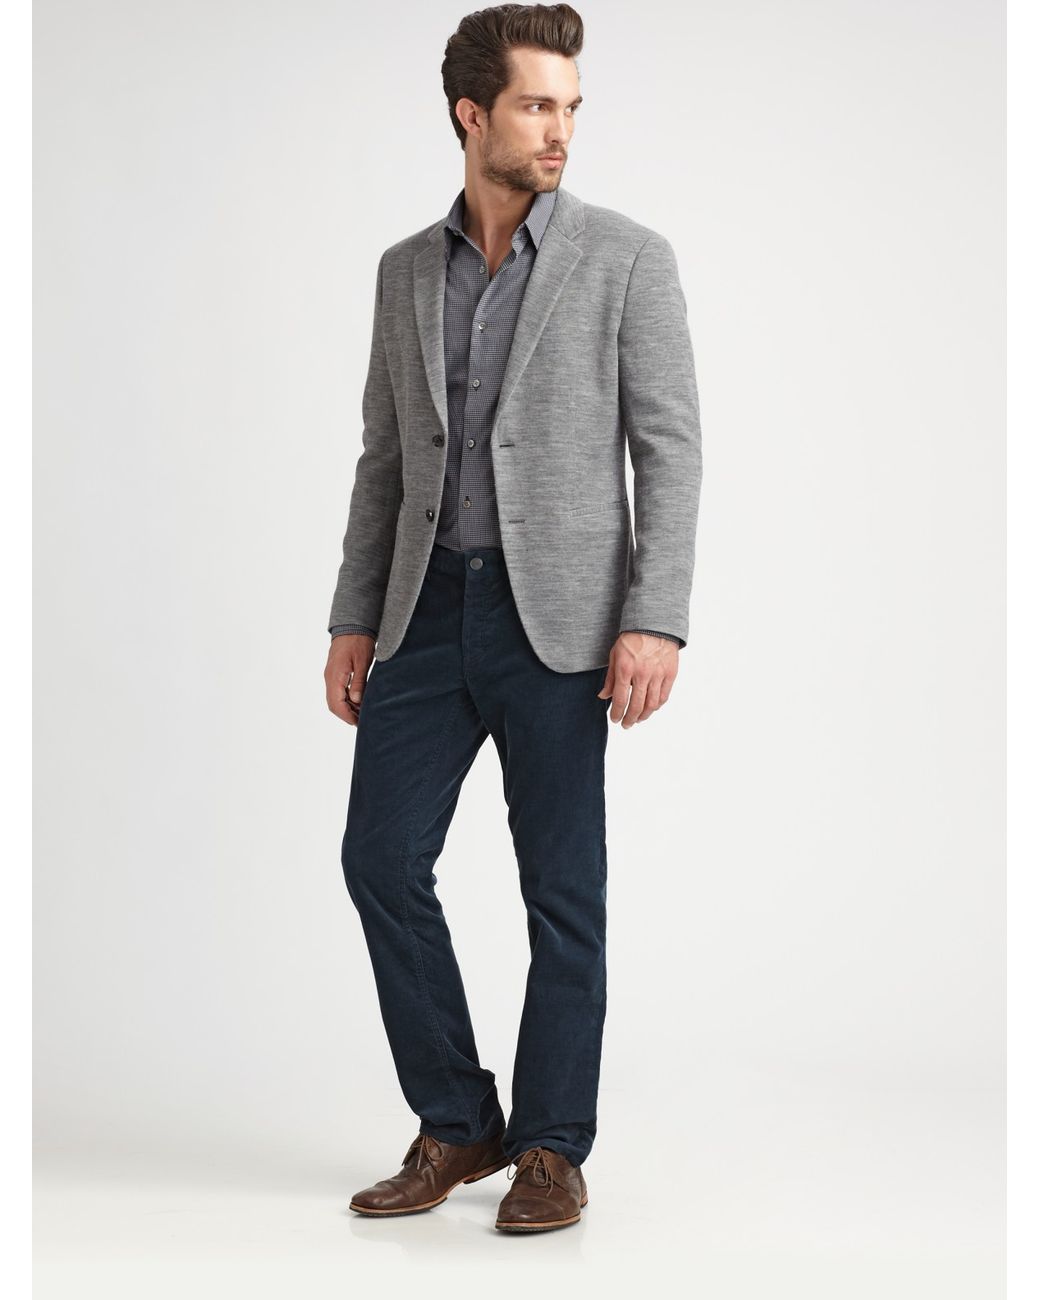 Theory Knit Blazer in Gray for Men | Lyst